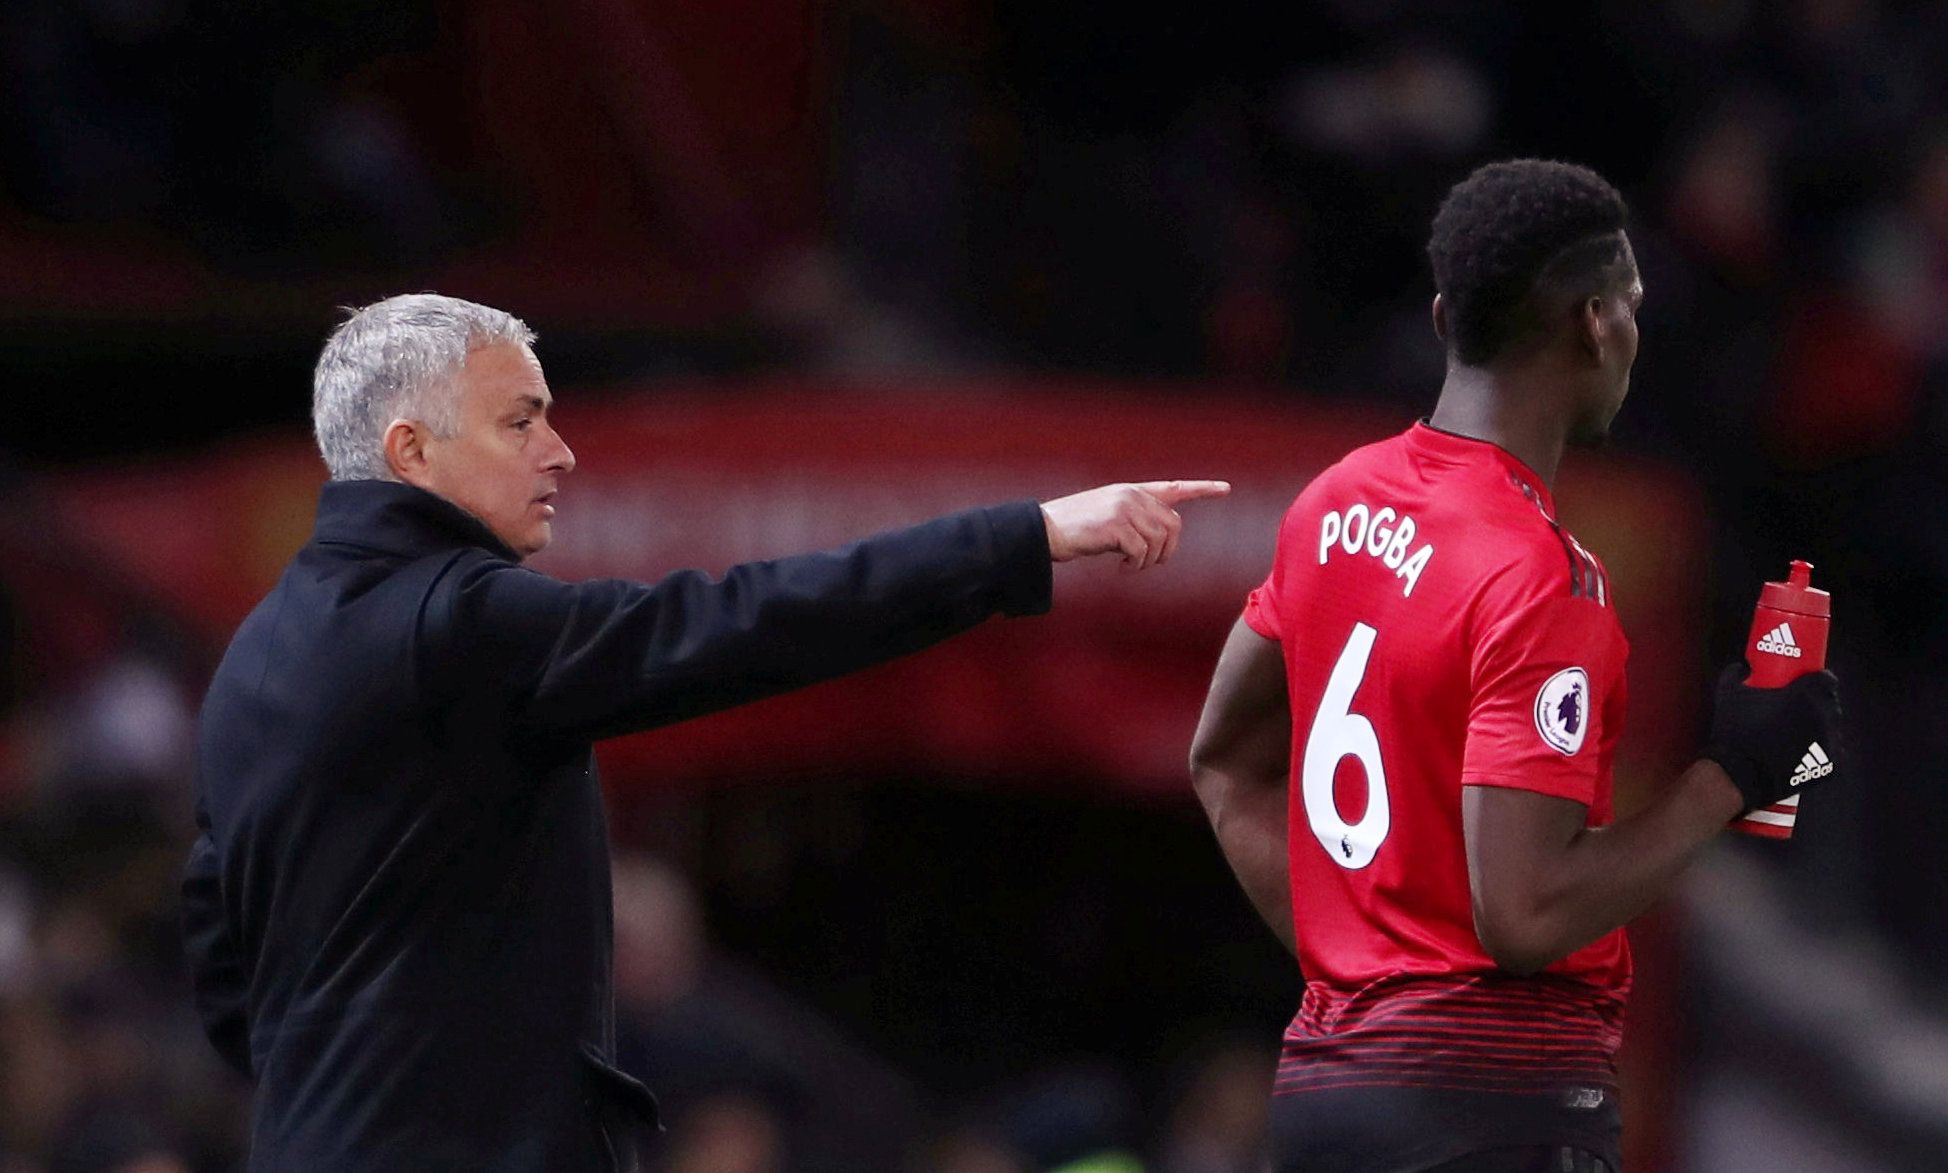 FILE PHOTO: Soccer Football - Premier League - Manchester United v Everton - Old Trafford, Manchester, Britain - October 28, 2018  Manchester United manager Jose Mourinho and Paul Pogba during the match  Action Images via Reuters/Lee Smith/File Photo  EDITORIAL USE ONLY. No use with unauthorized audio, video, data, fixture lists, club/league logos or 